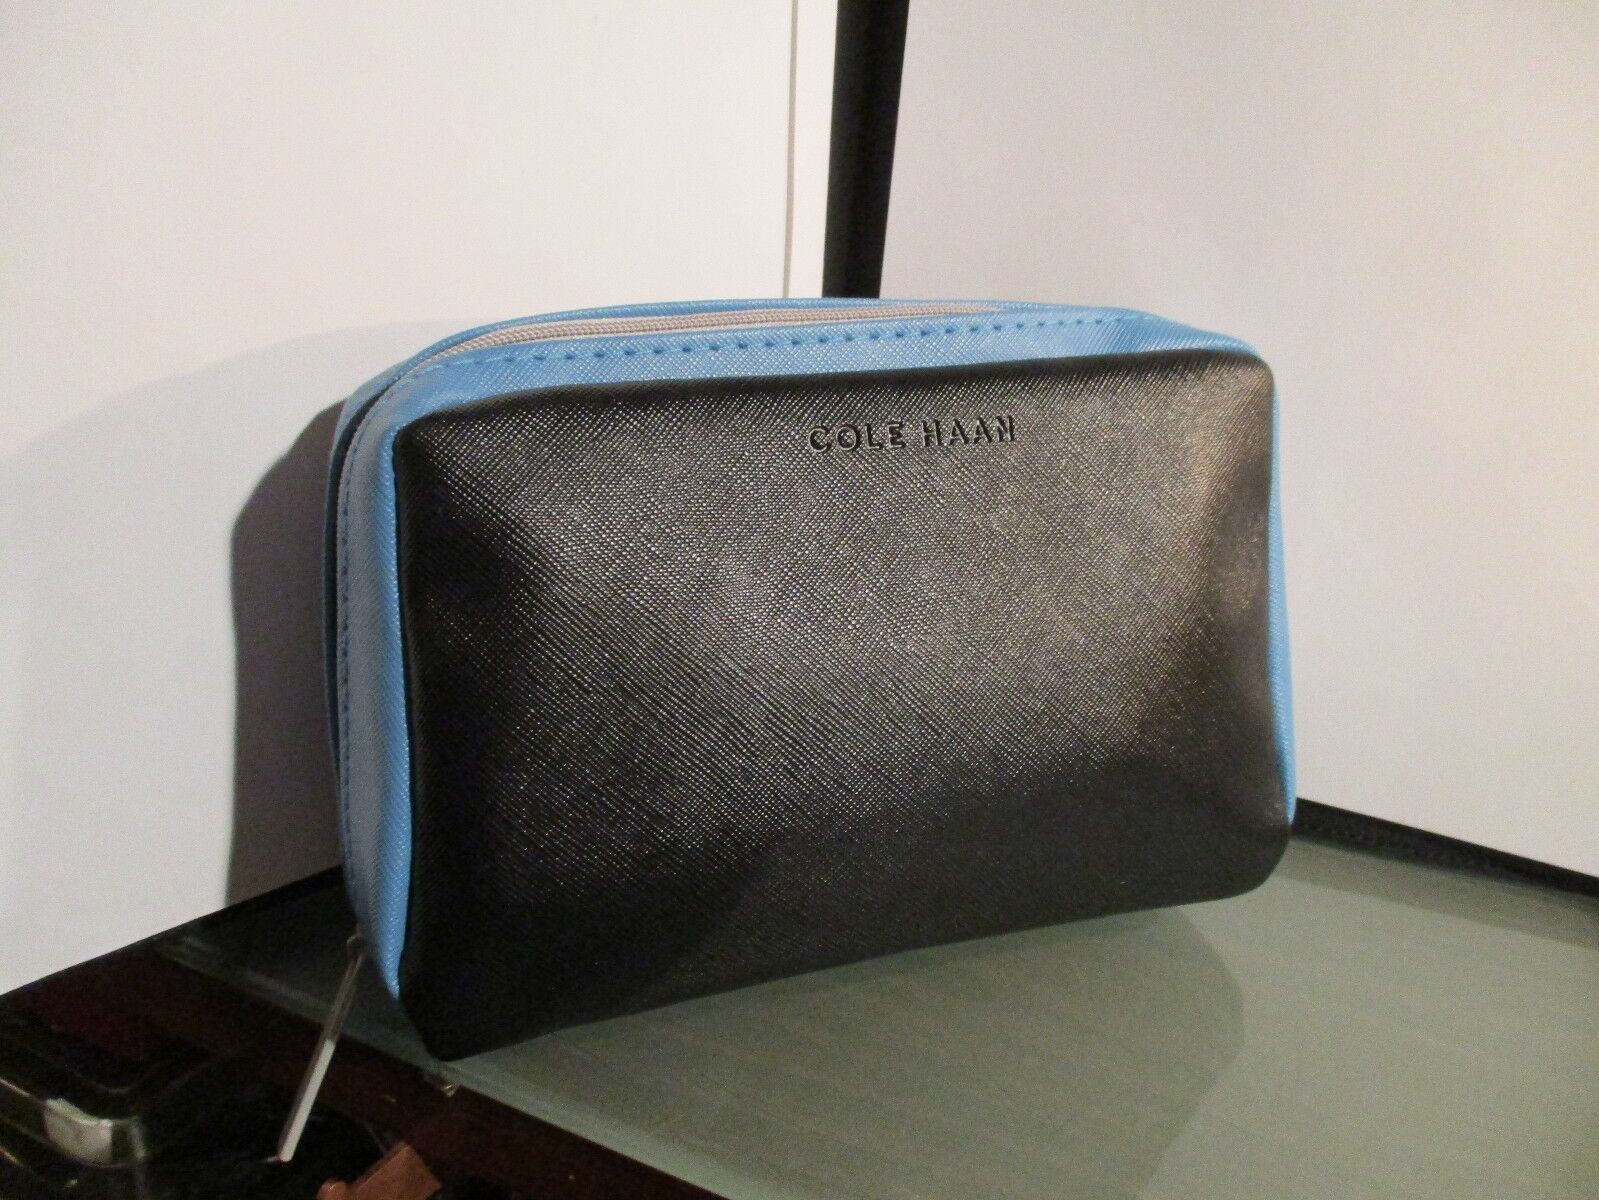 COLE HAAN AMERICAN AIRLINES ZERO GRAND amenity kit bag cosmetic travel holder 